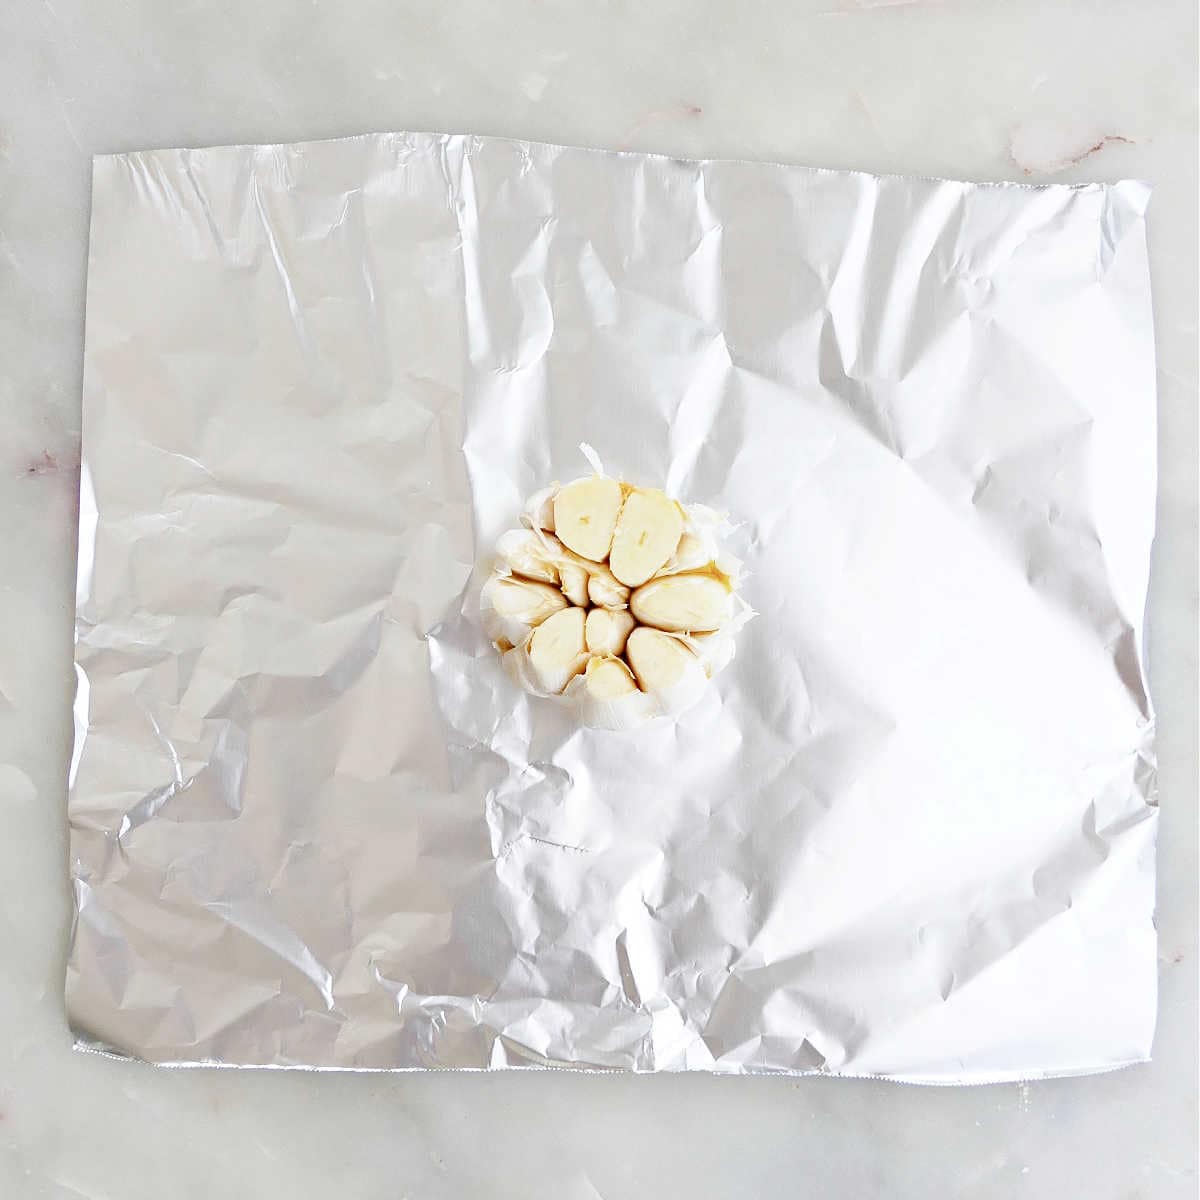 head of garlic on a piece of foil drizzled with oil